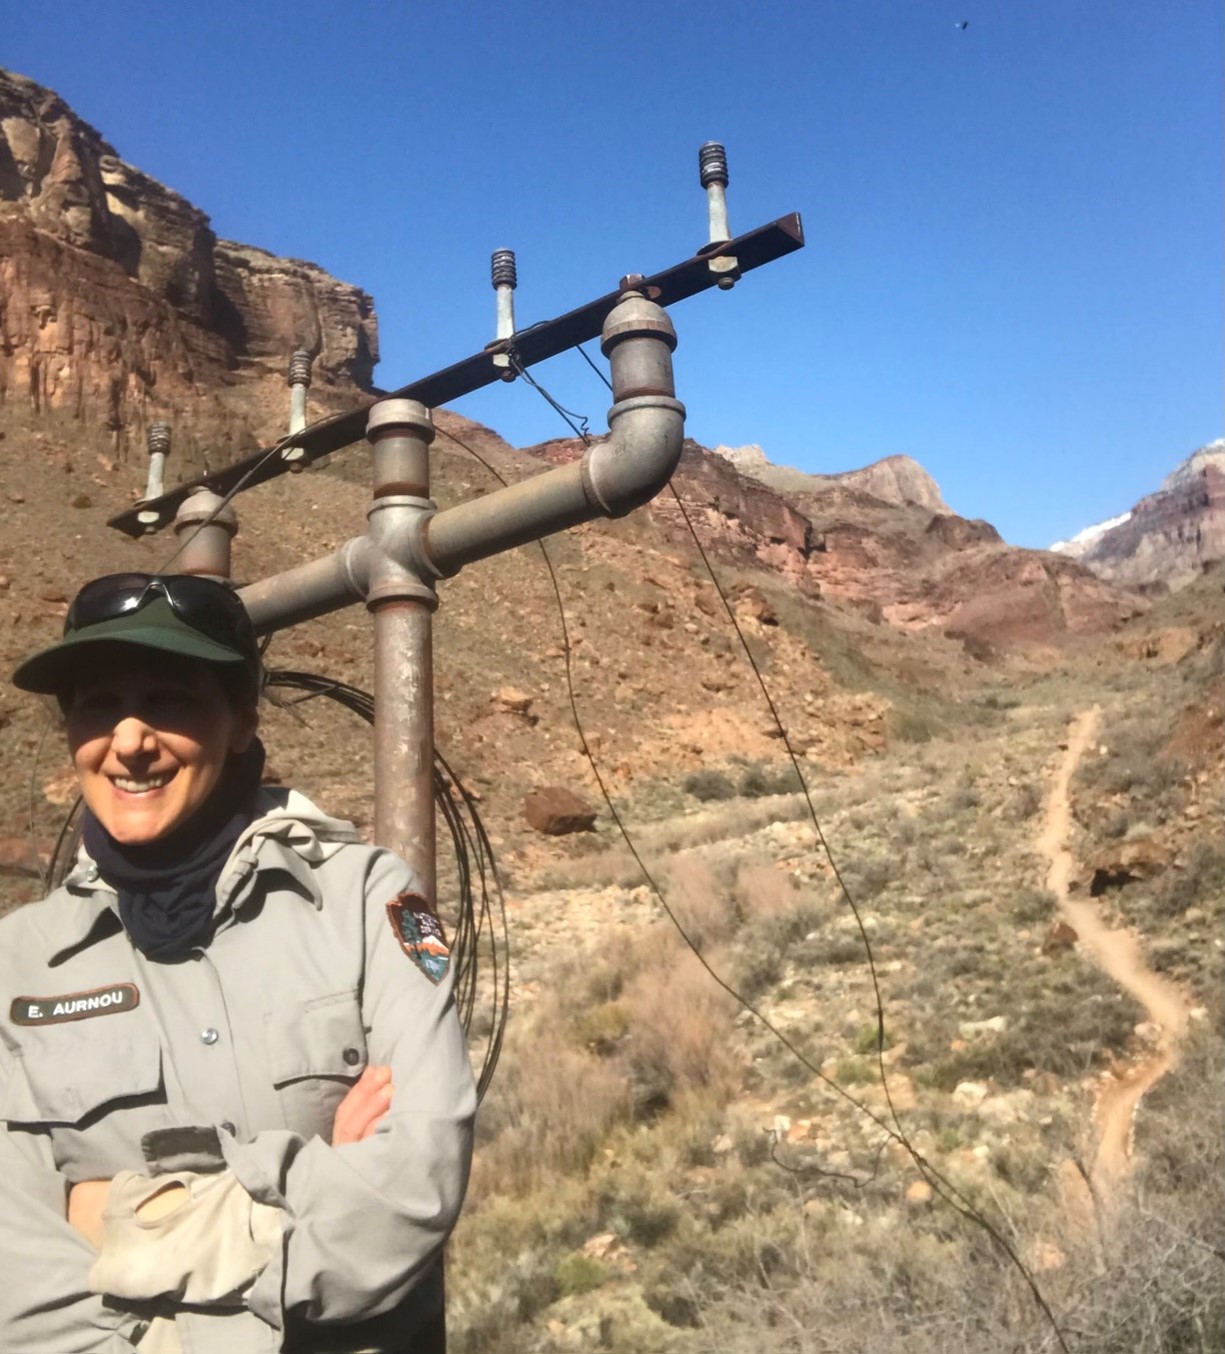 Betsy Aurnou stands next to a historic telephone pole and wires in the inner canyon